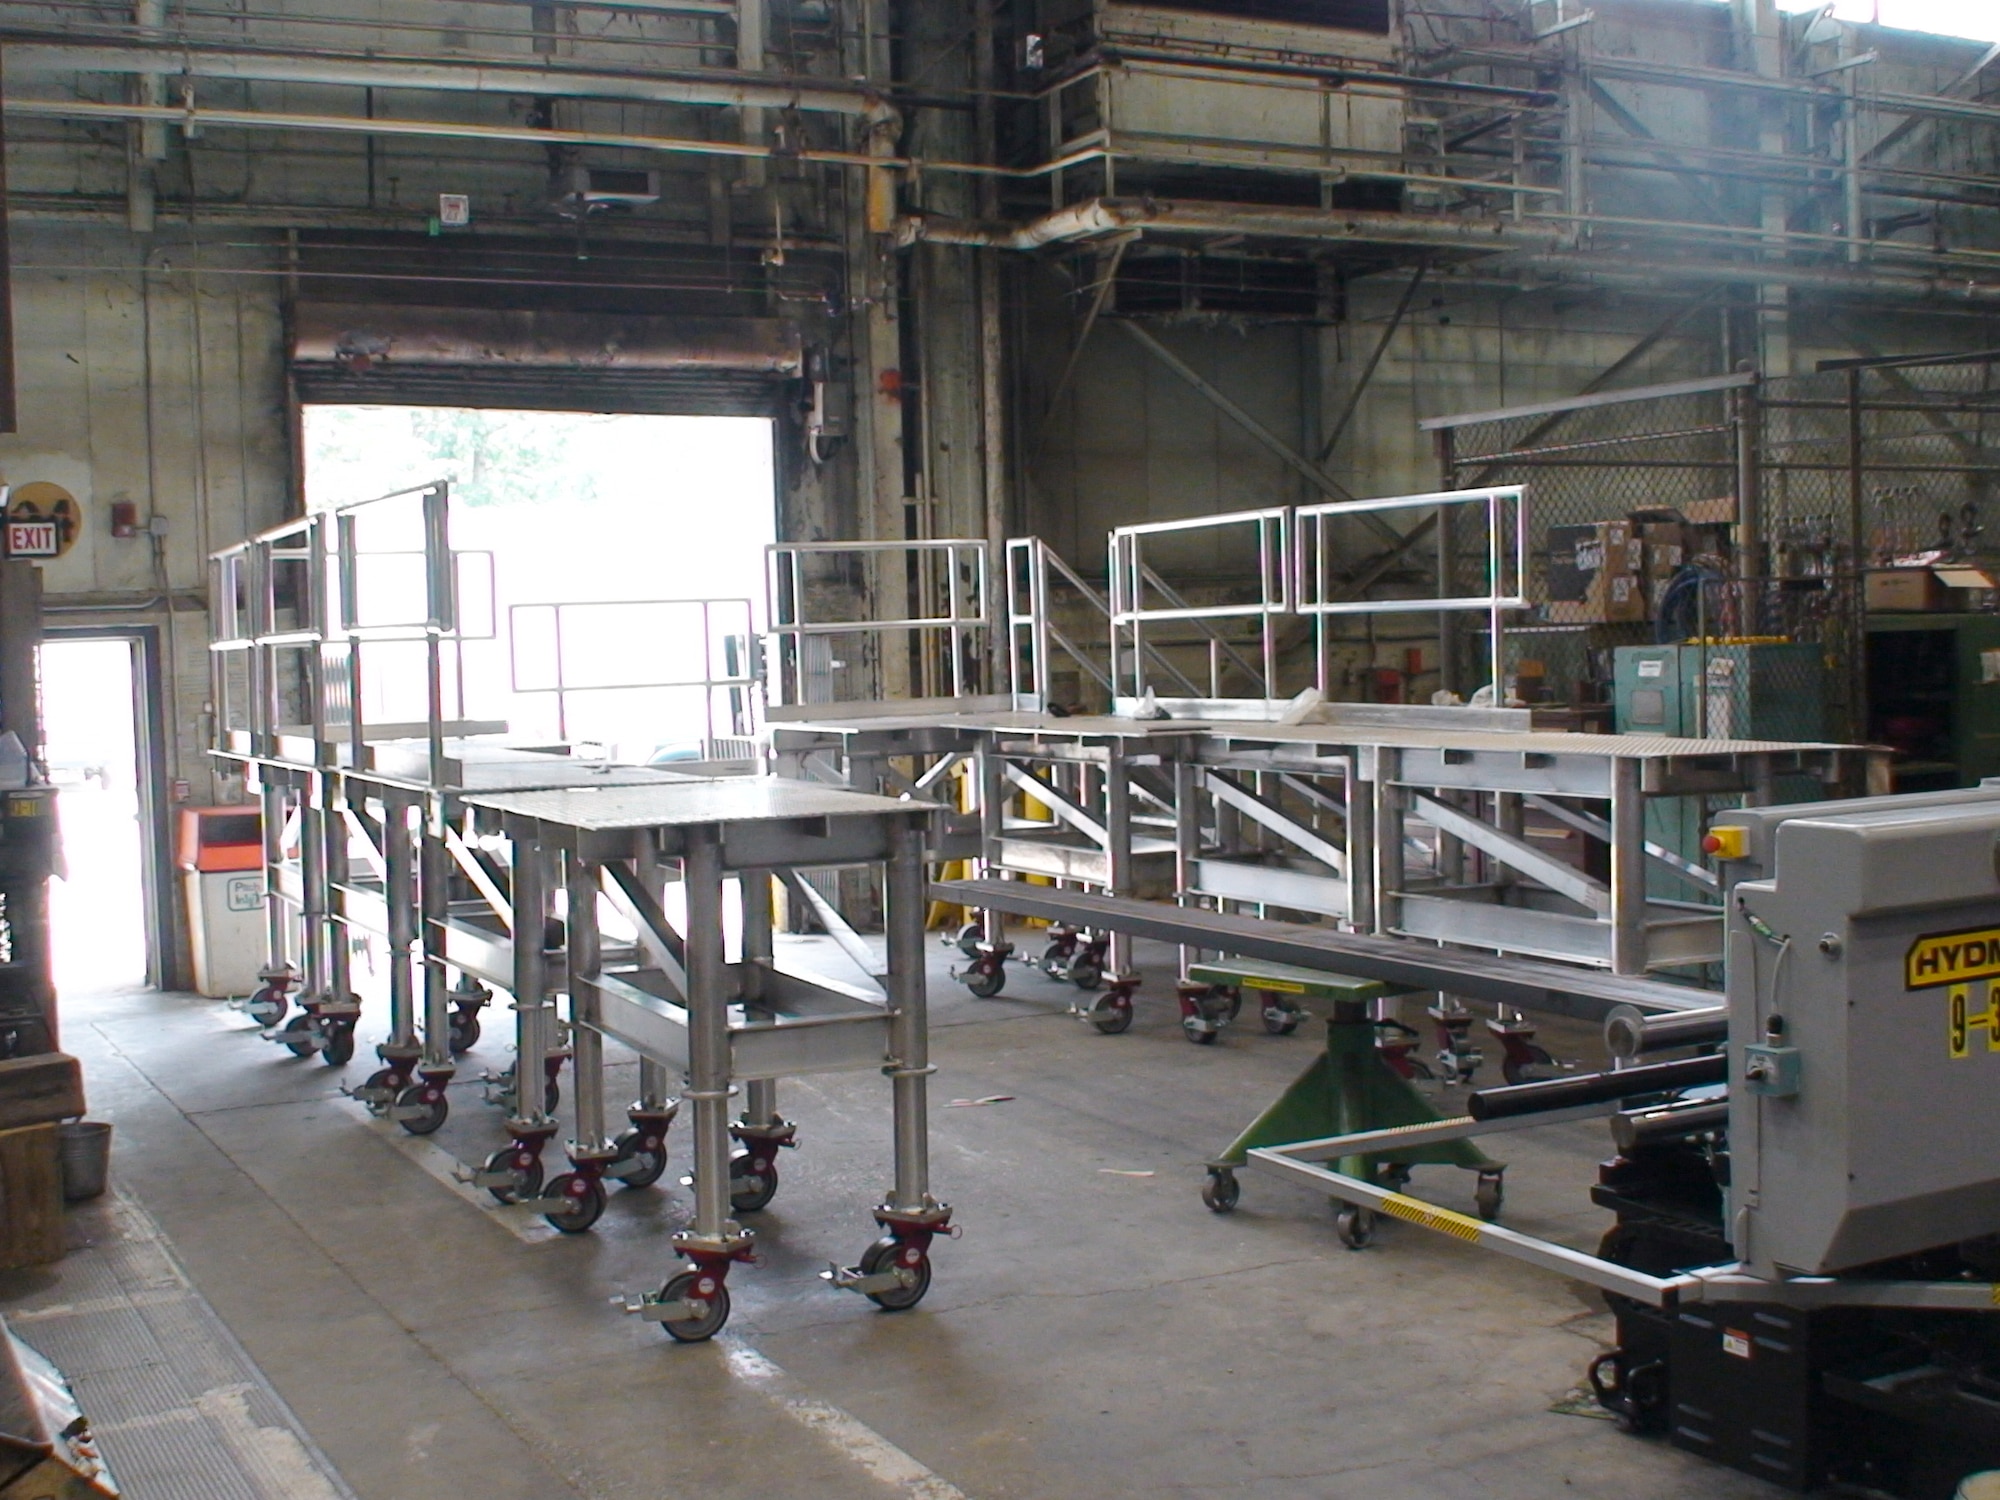 Ironworkers with the Arnold Engineering Development Complex (AEDC) Model and Machine Shop complete an aluminum platform system, shown here Sept. 16, 2020, fully assembled. The platform was installed in the AEDC C-2 Engine Test Cell. (U.S. Air Force photo)